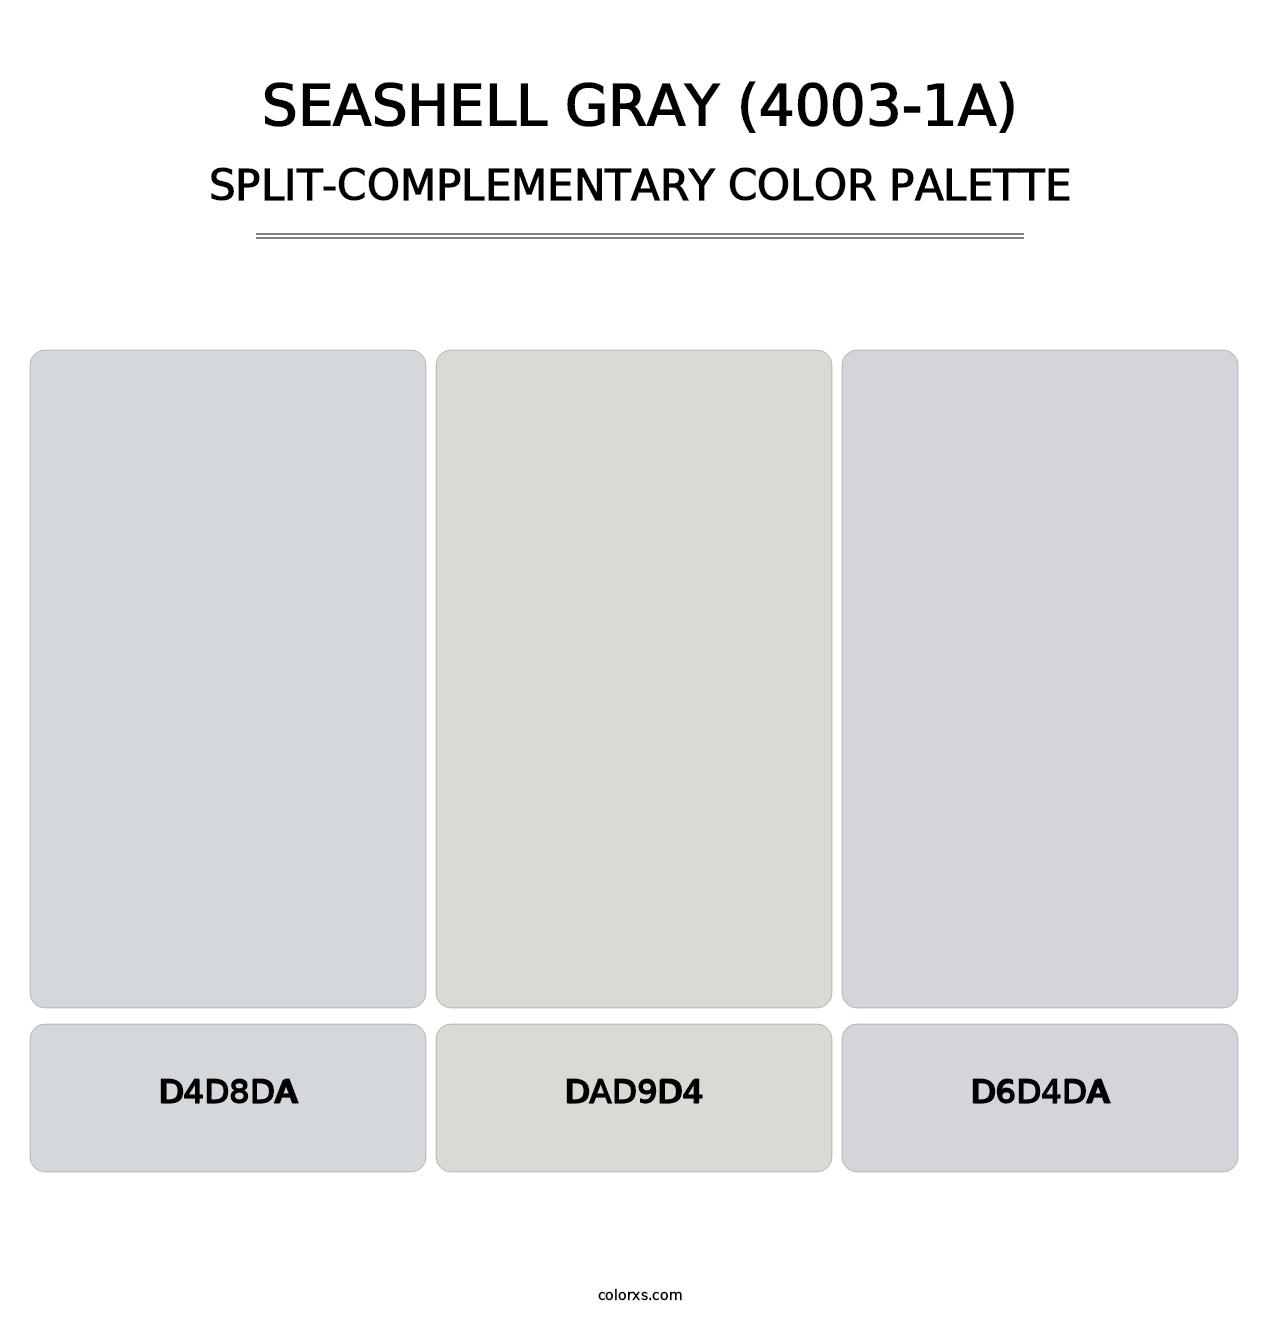 Seashell Gray (4003-1A) - Split-Complementary Color Palette